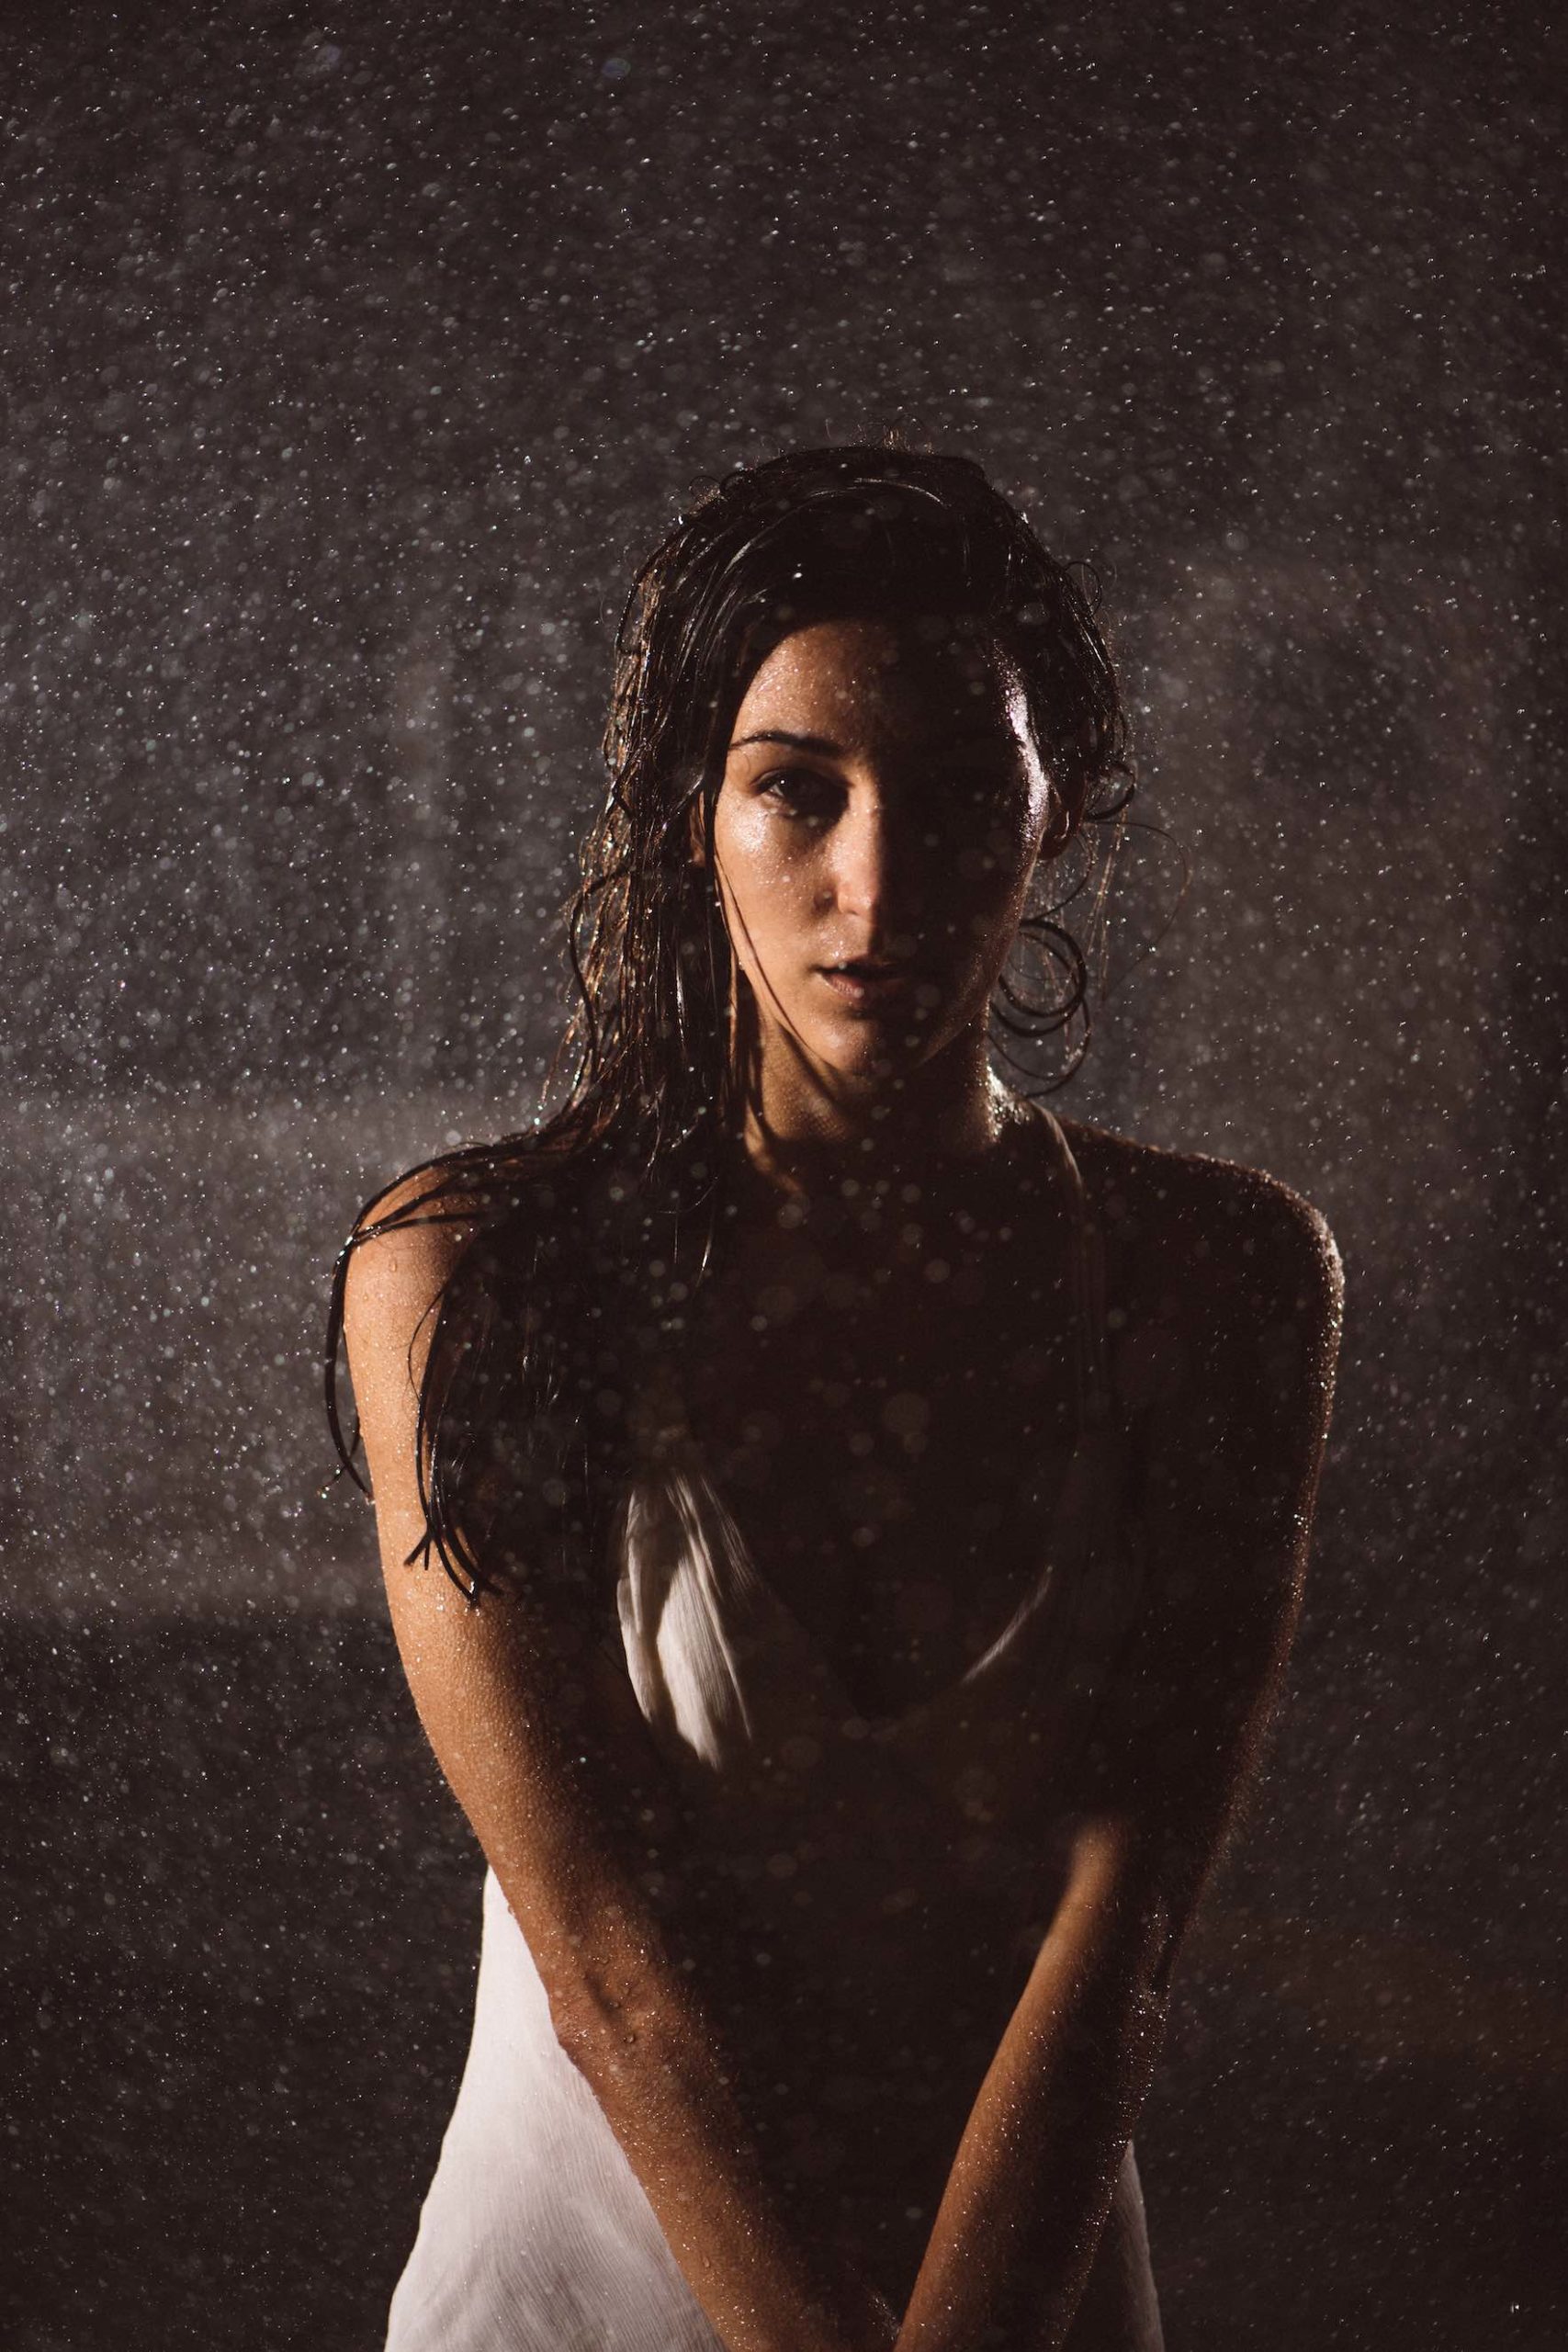 Crew Call Rain and Water Woman with long hair posing for camera under a shower of water